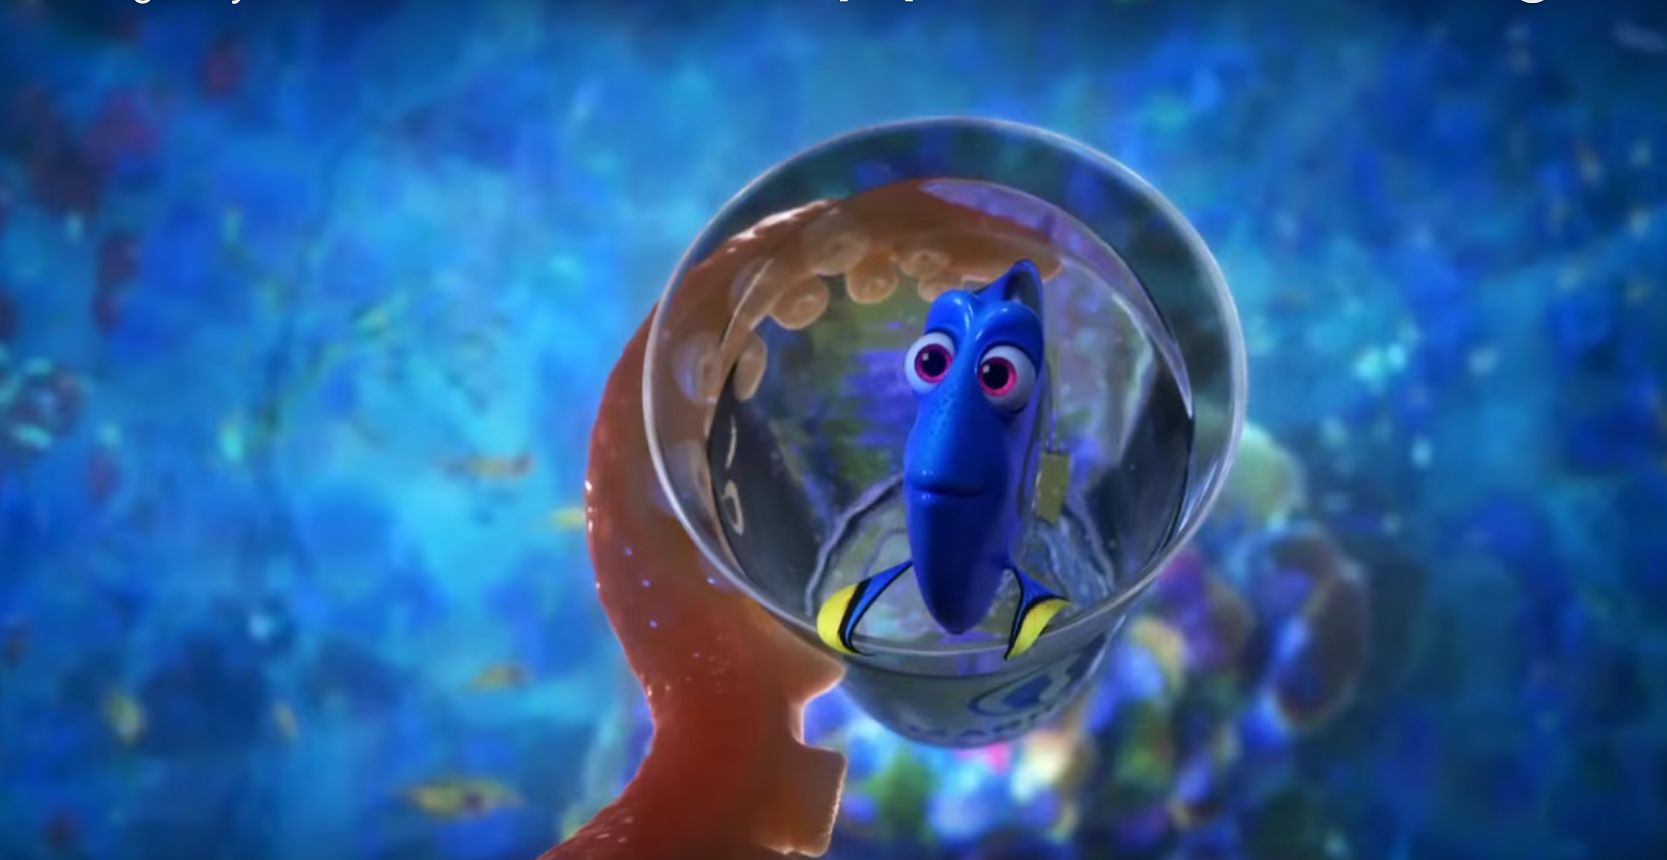 all-trailers-lead-to-finding-dory-check-out-brand-new-footage-in-this-japanese-internat-941918.jpg